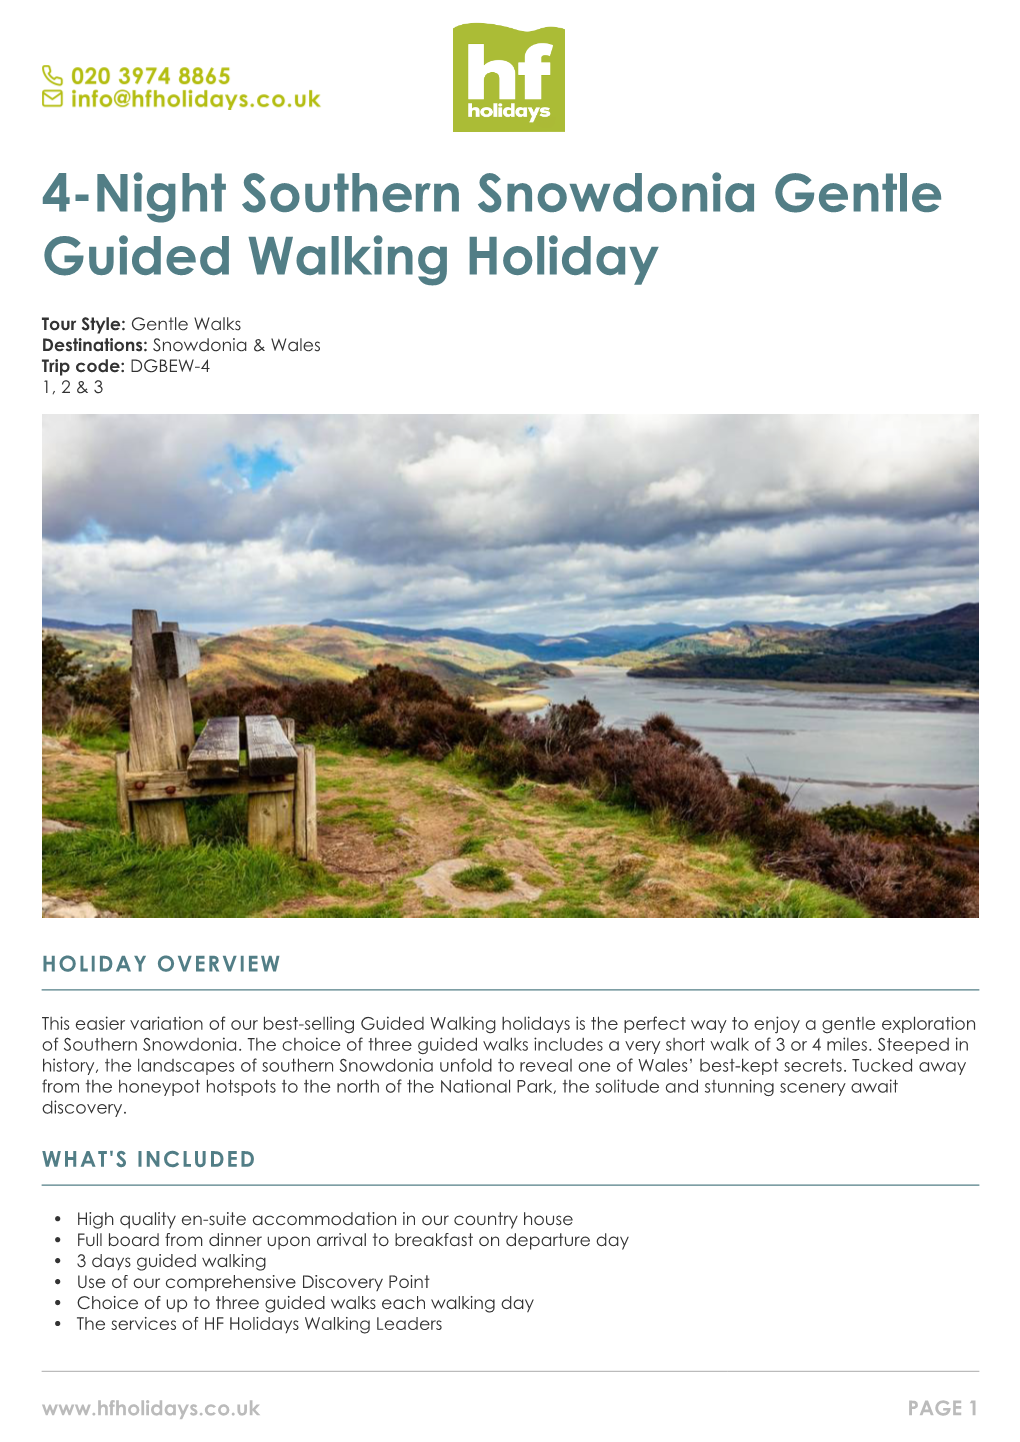 4-Night Southern Snowdonia Gentle Guided Walking Holiday